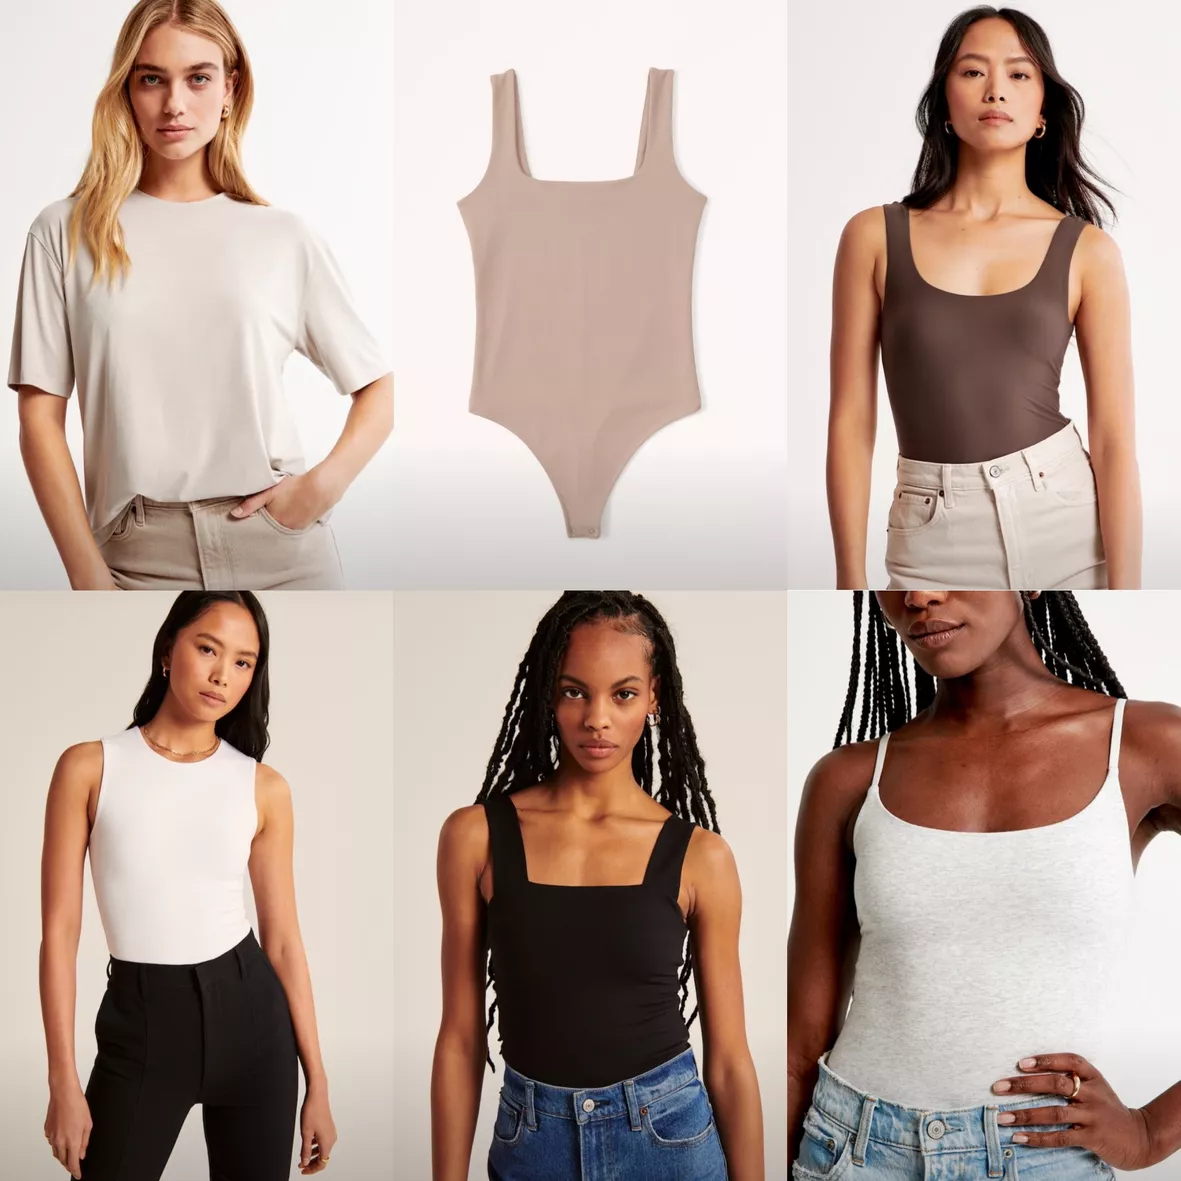 What are the different types of women's bodysuits and tops?